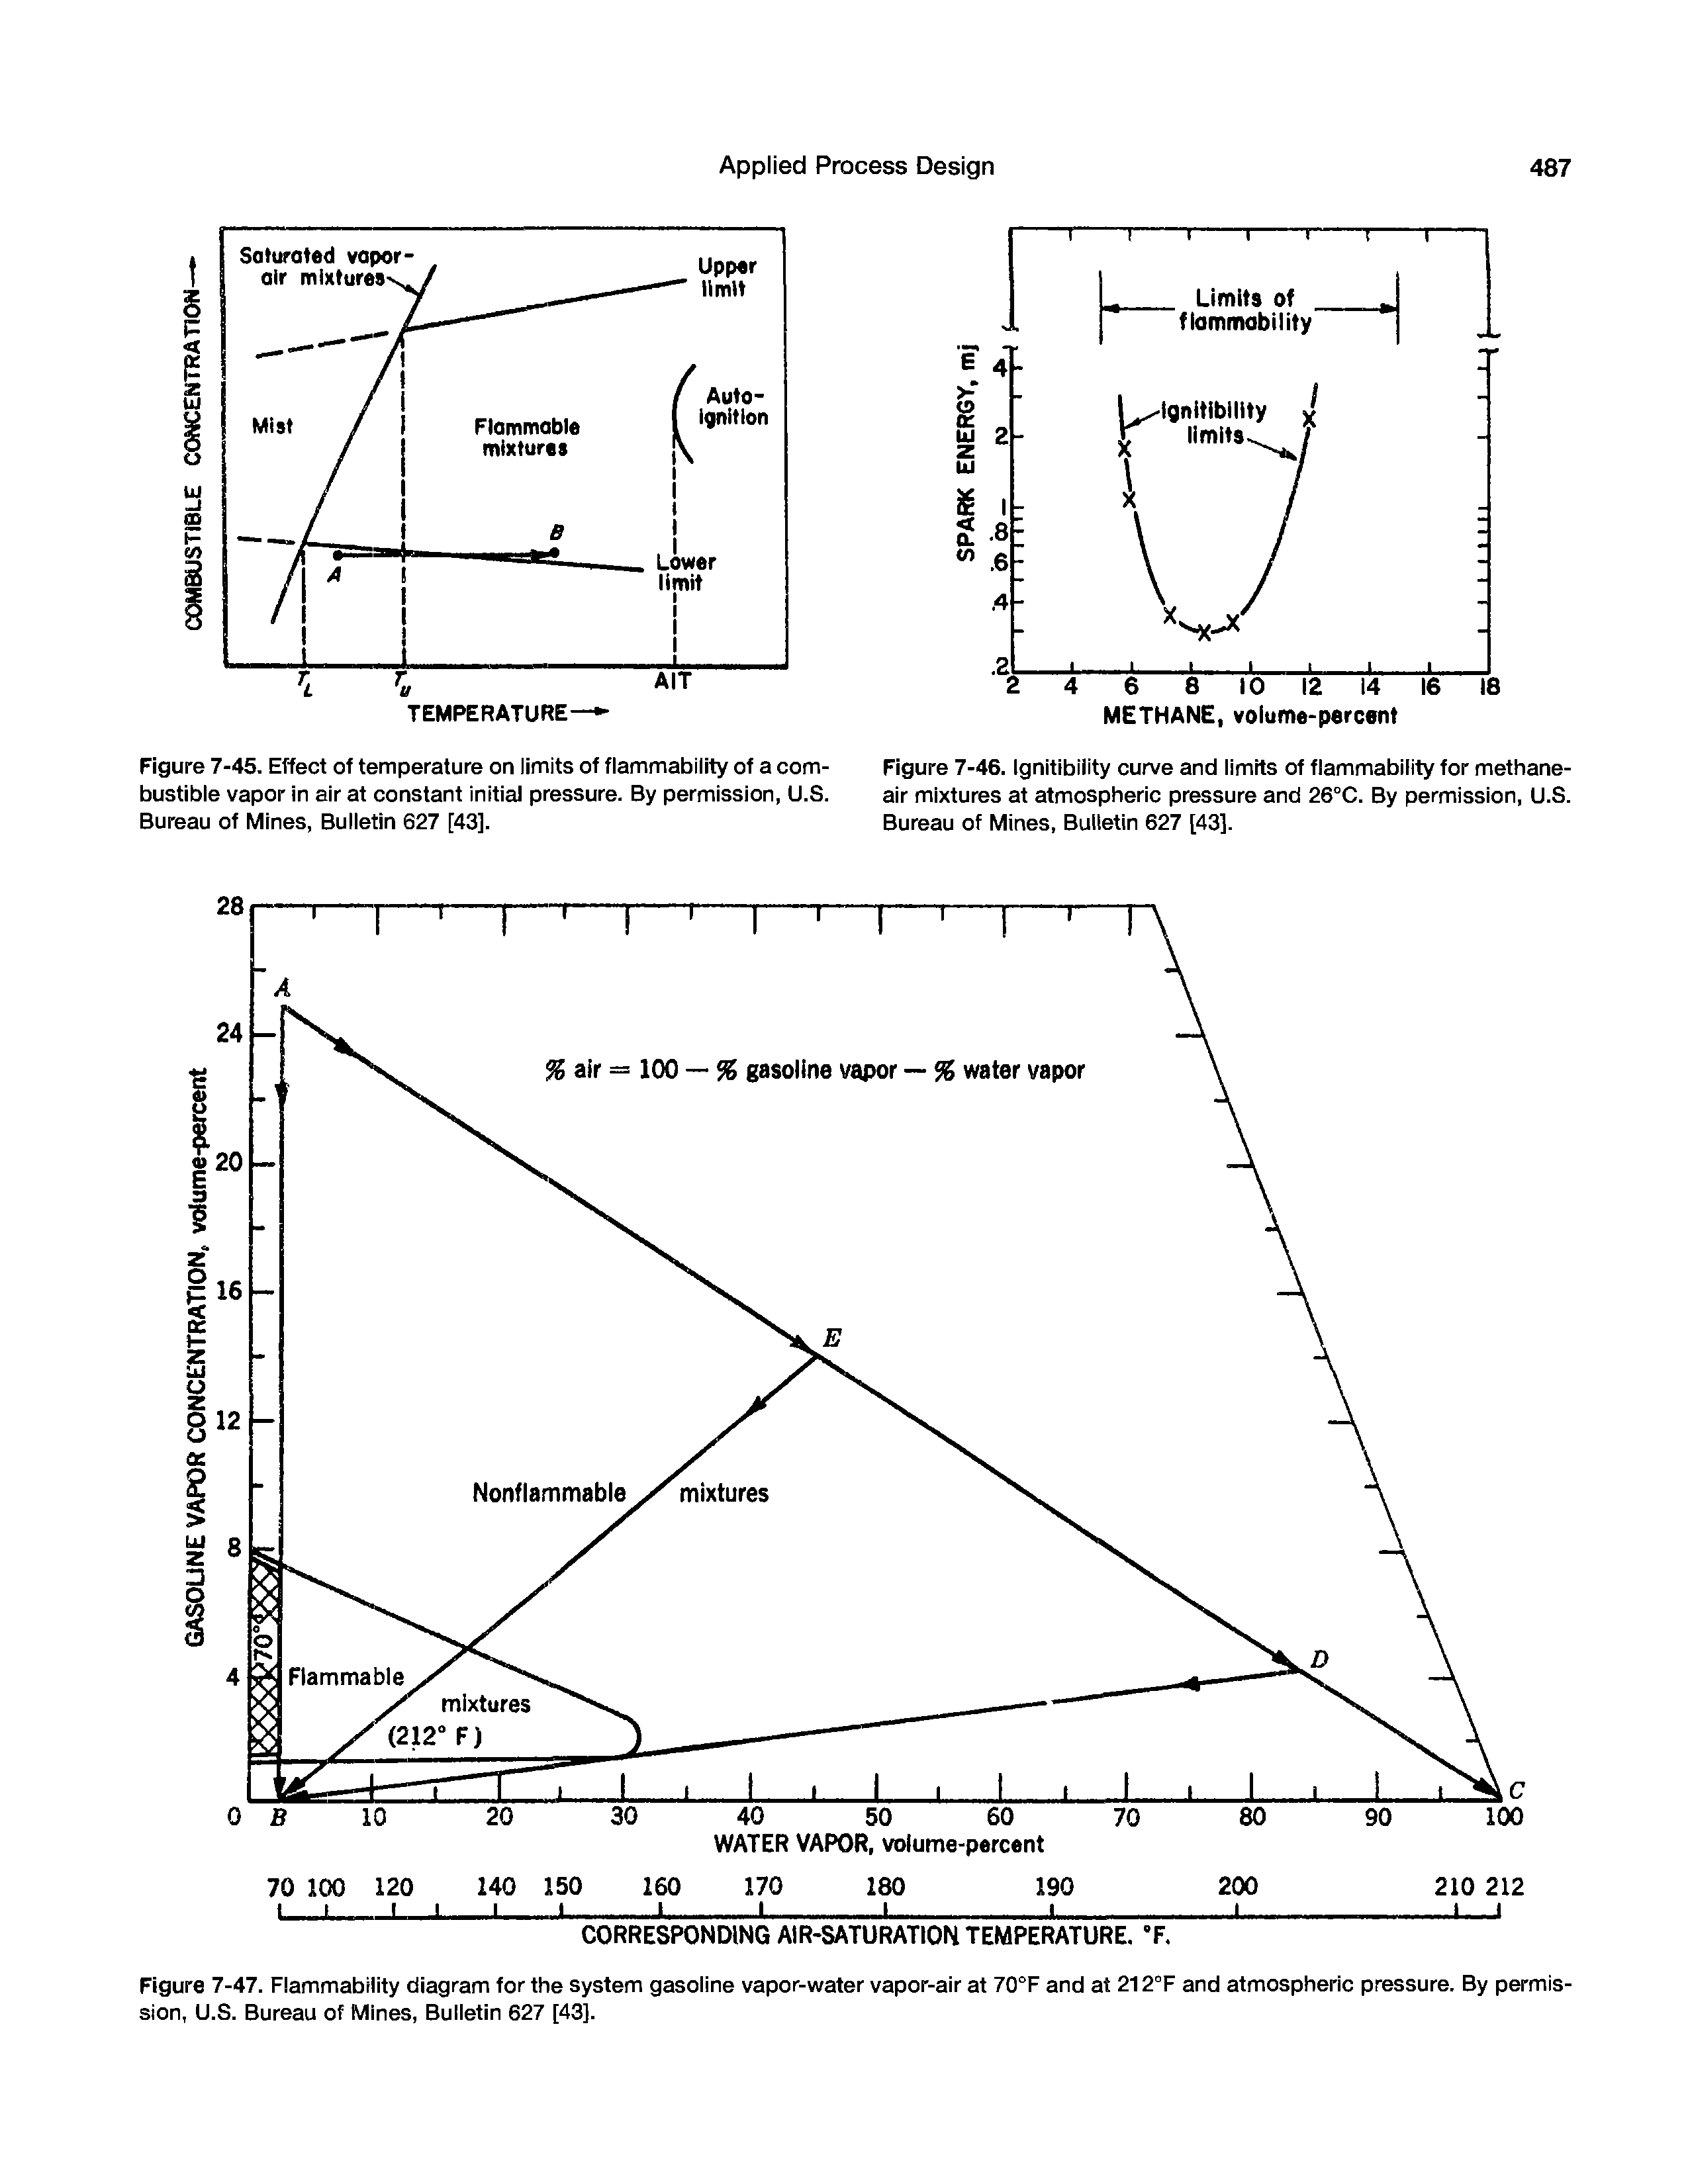 Figure 7-45. Effect of temperature on limits of flammability of a combustible vapor in air at constant initiai pressure. By permission, U.S. Bureau of Mines, Bulletin 627 [43].